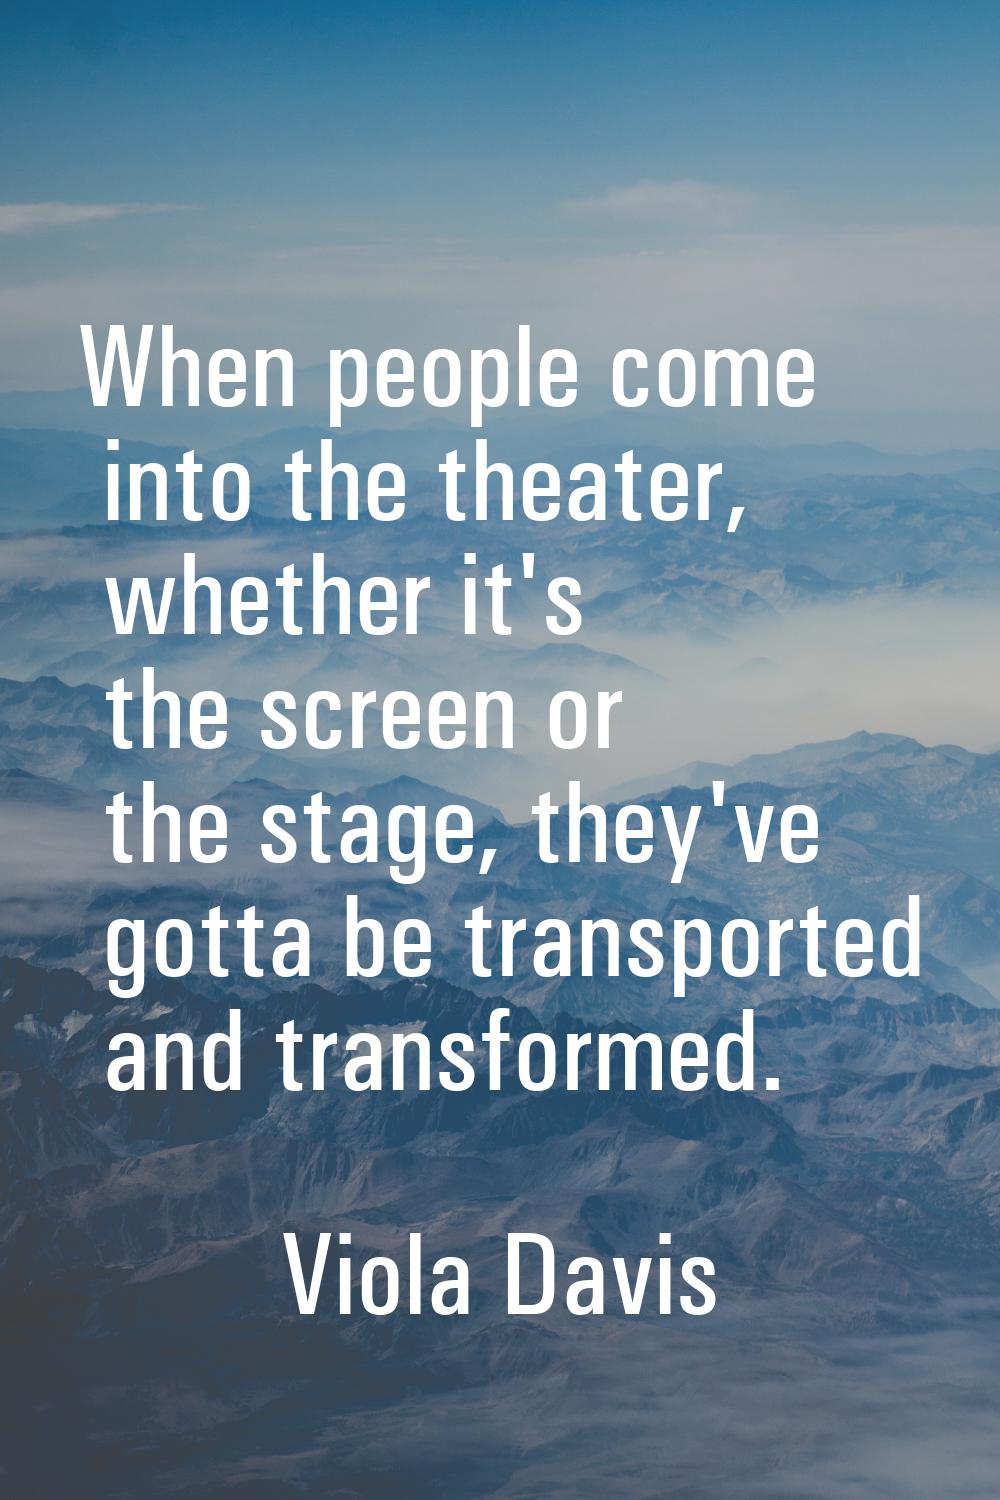 When people come into the theater, whether it's the screen or the stage, they've gotta be transport